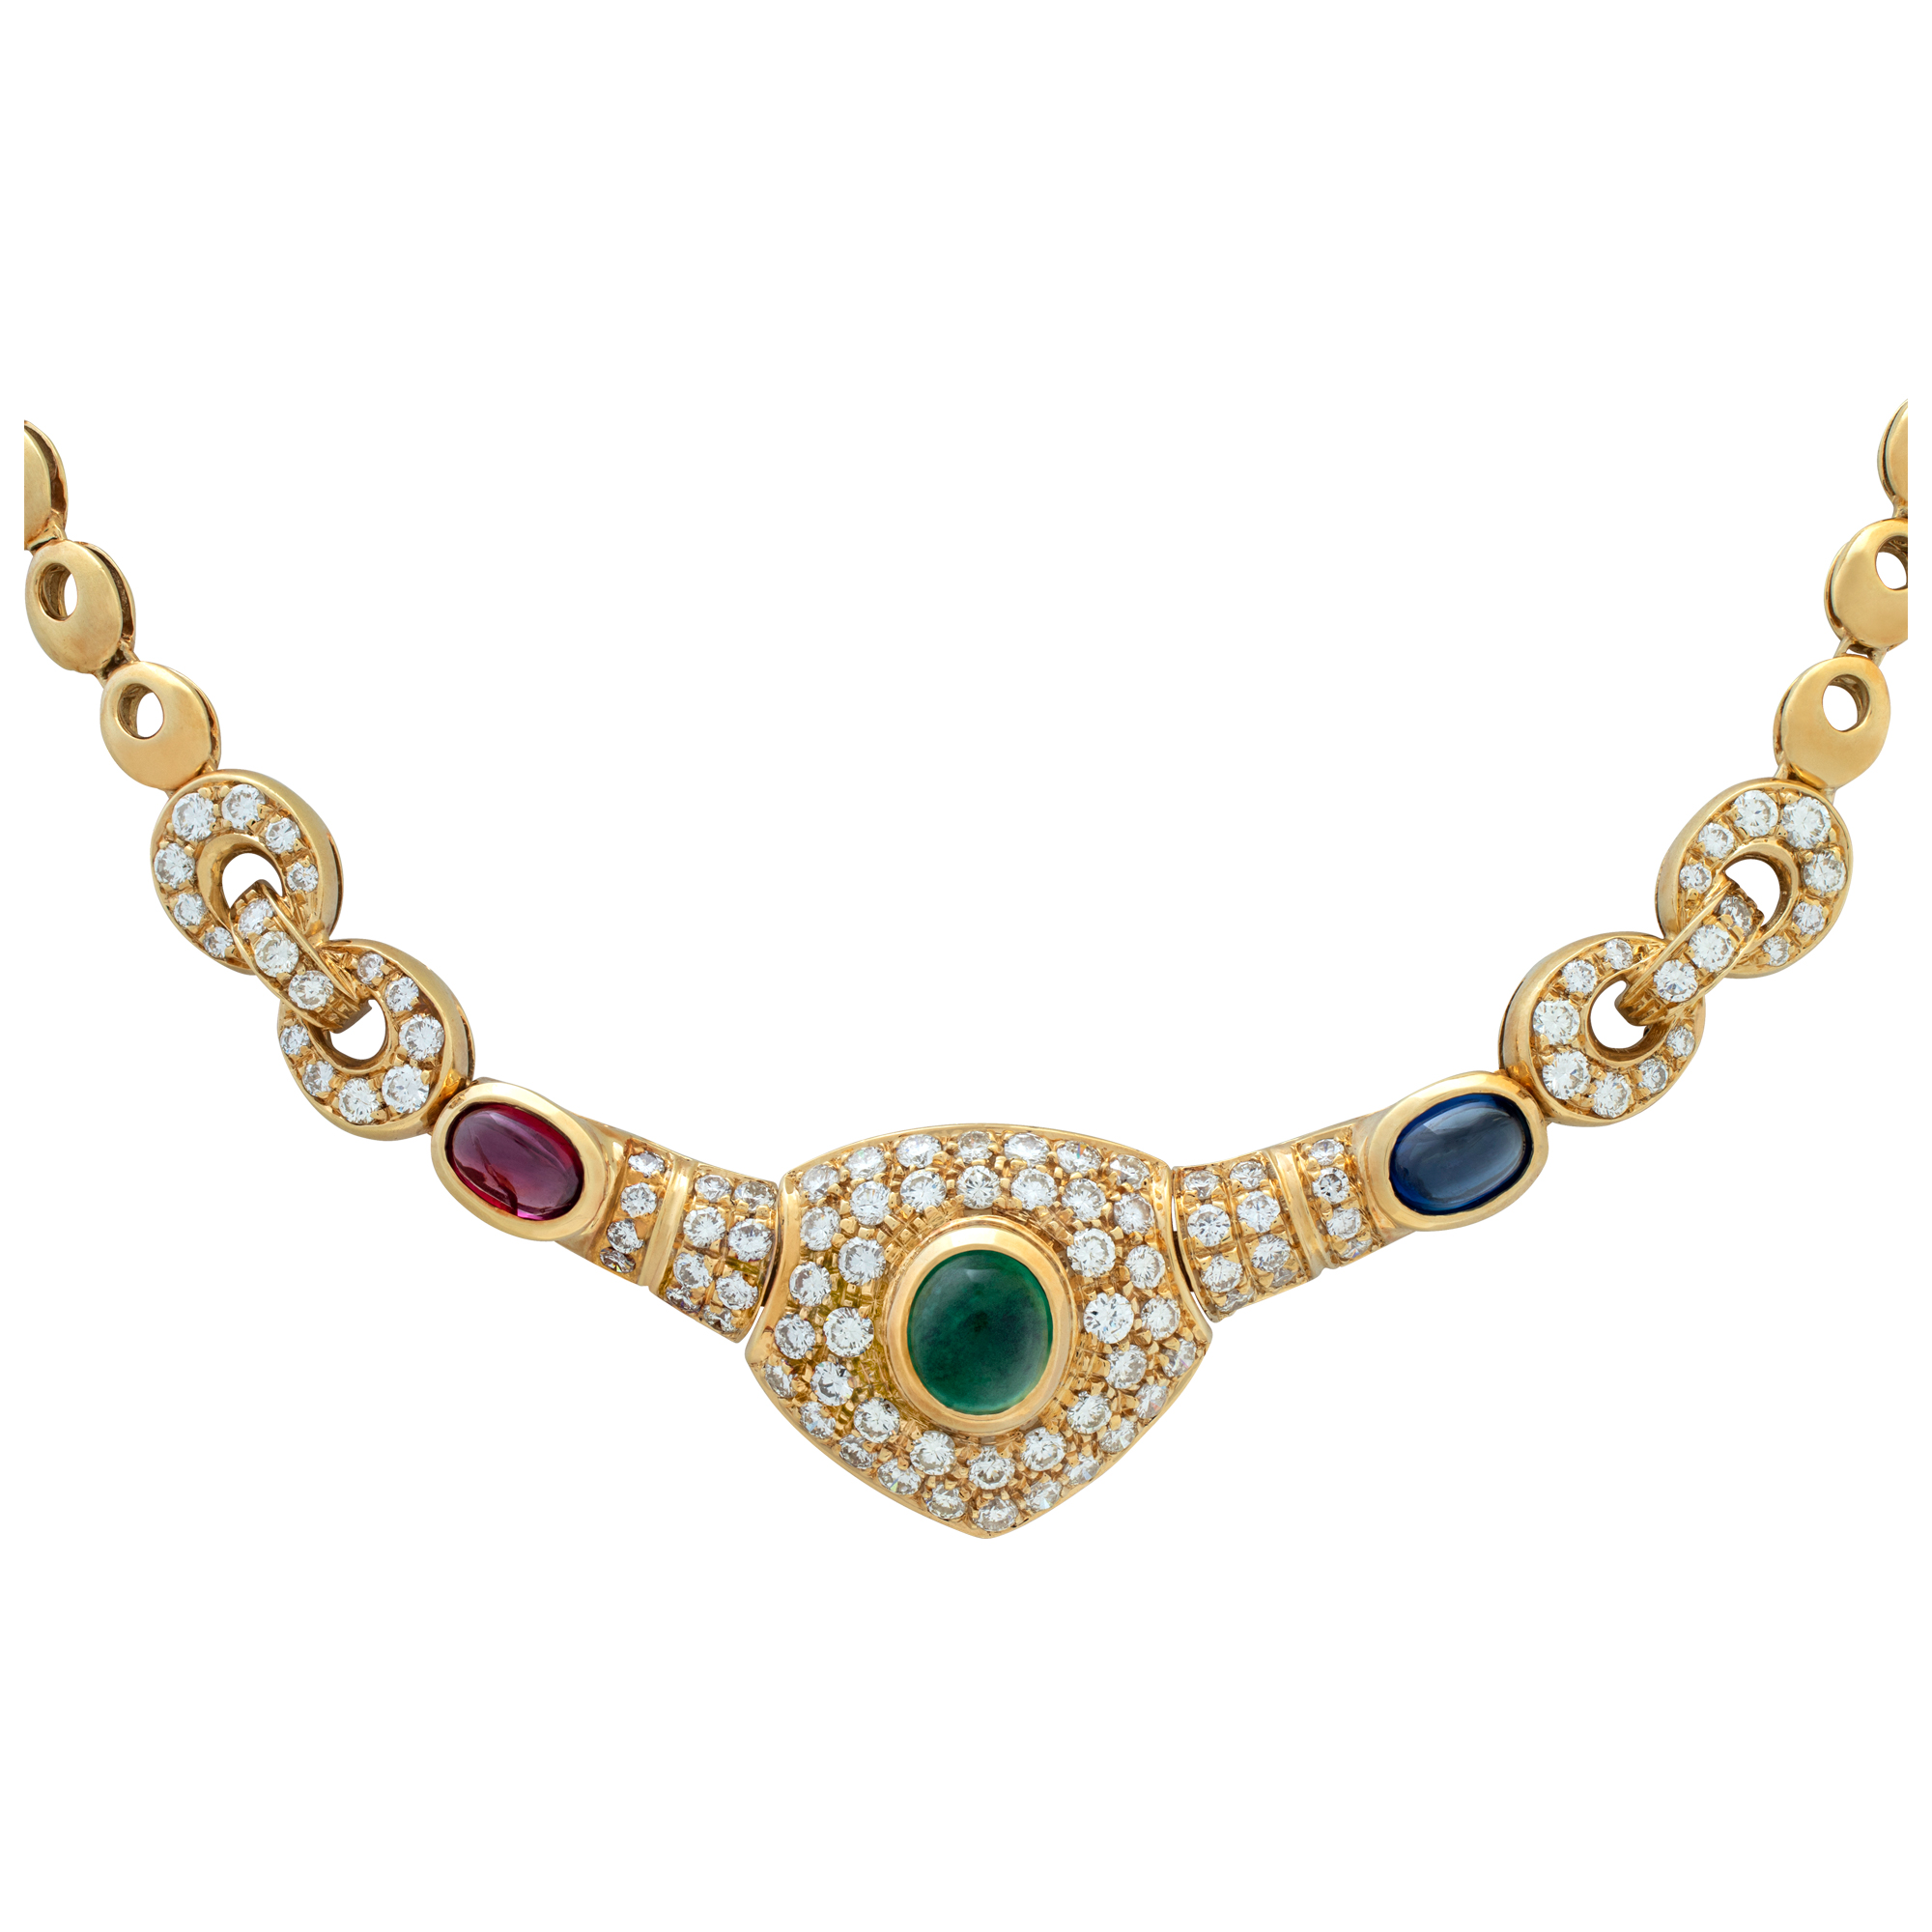 Cabochon emerald, sapphire and ruby necklace with over 3.00 carats round brilliant cut diamonds set in 18K yellow gold. Length: 16 inches.